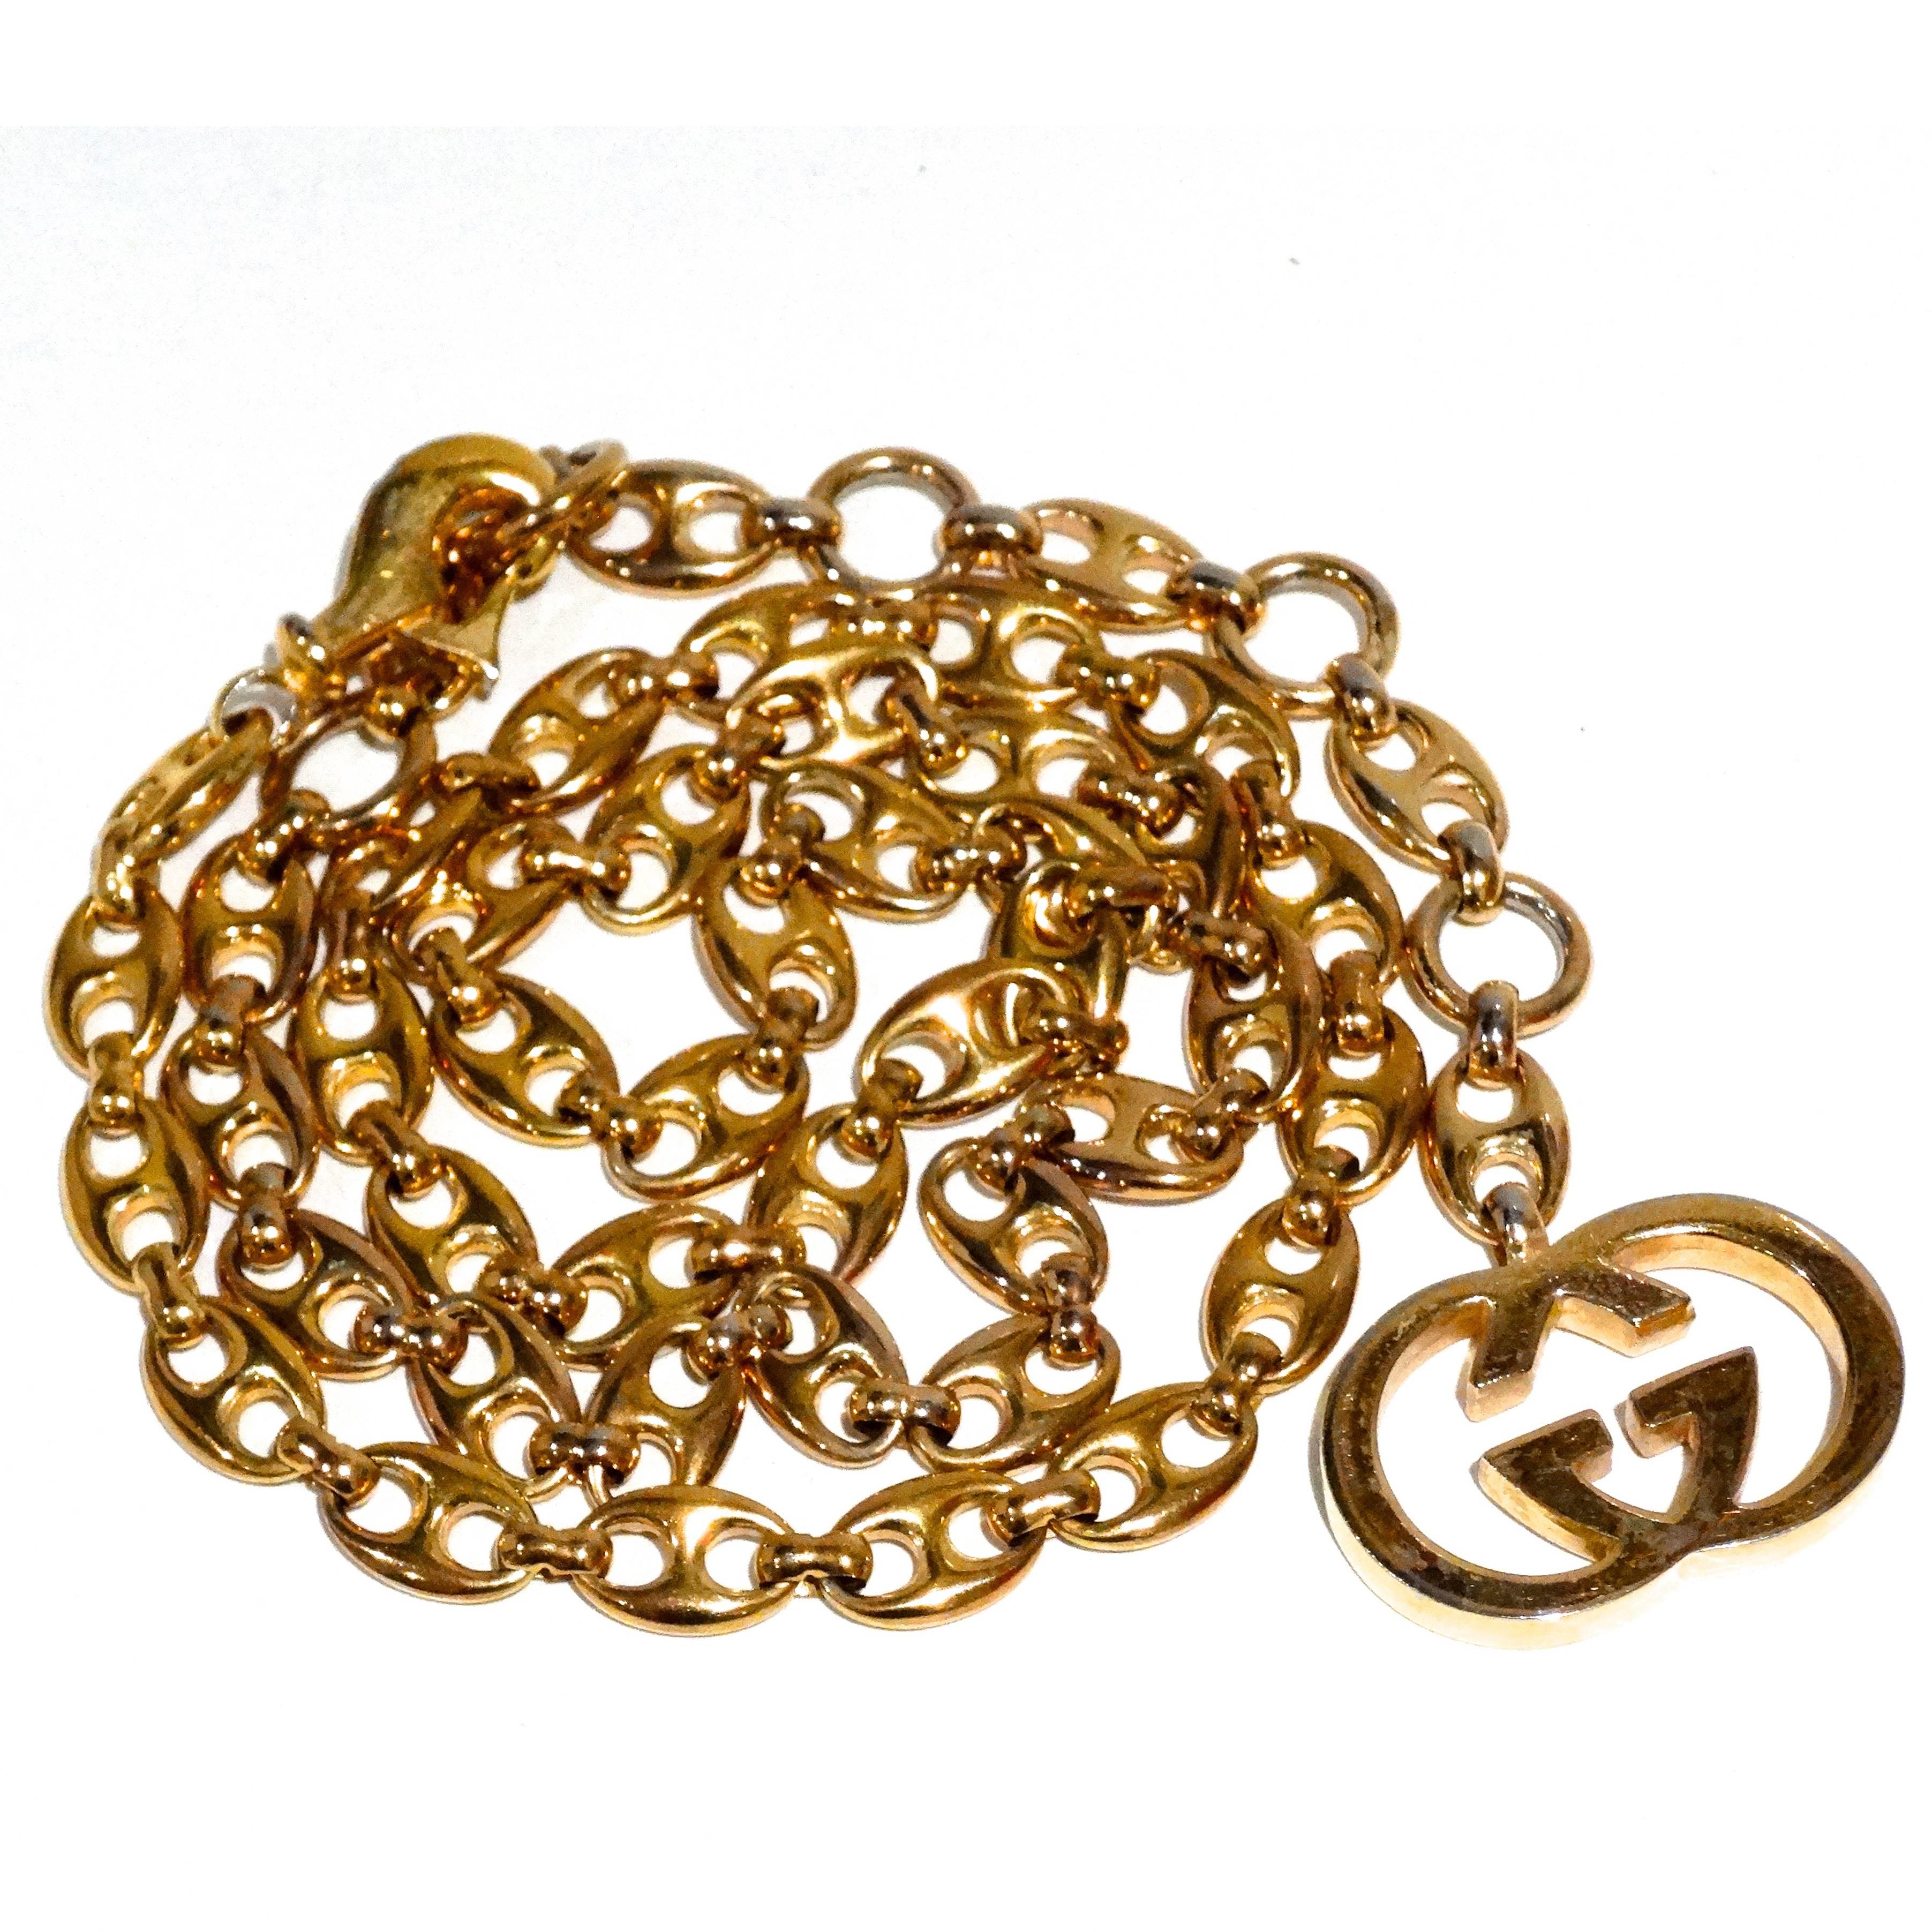 1970s Gucci Anchor Link Pendent Necklace